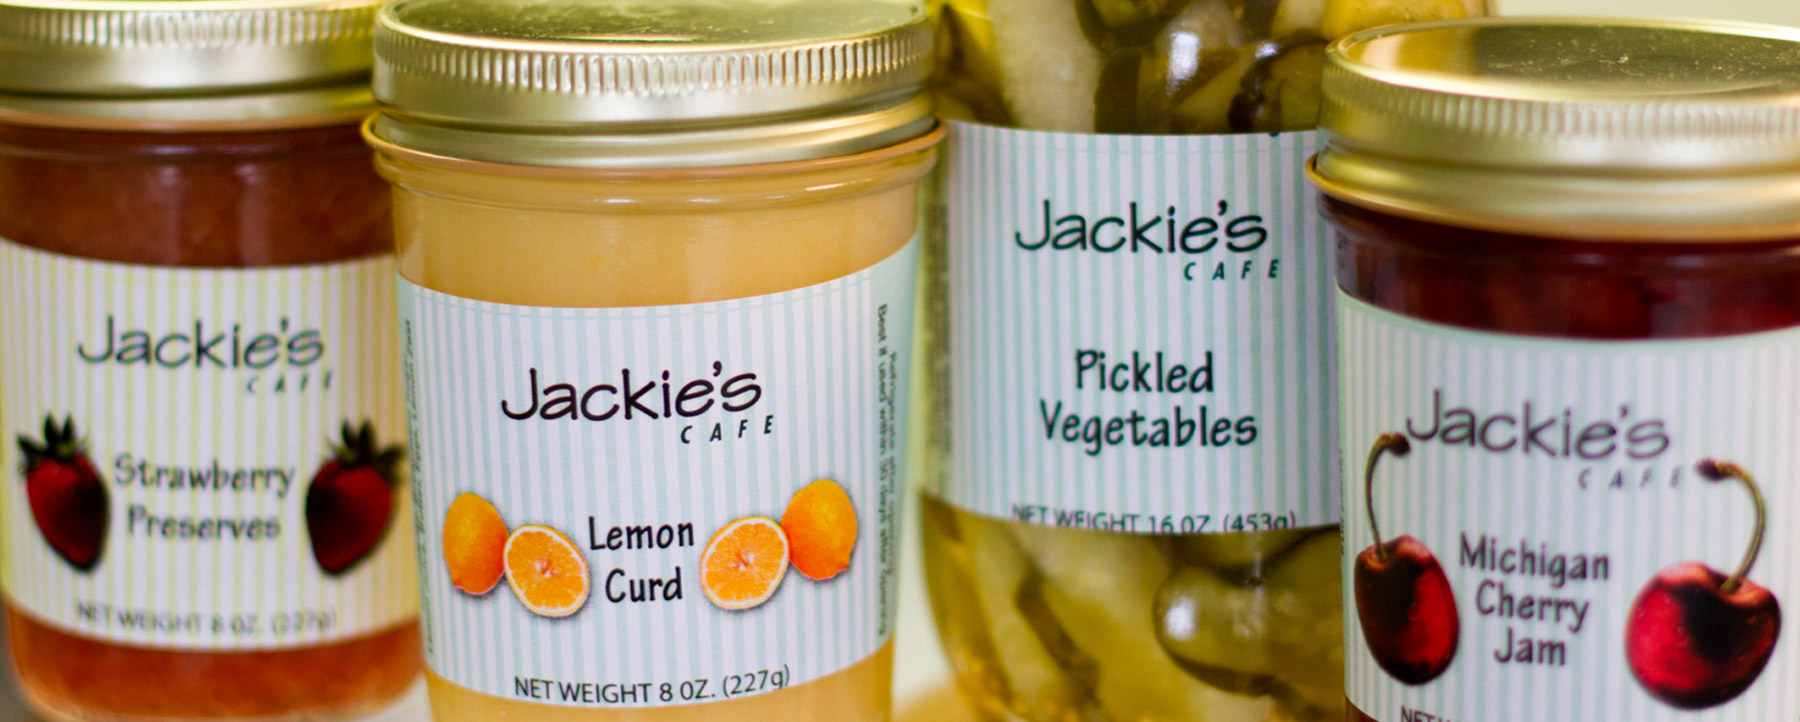 Array of Jackies Cafe jams and pickled vegetables